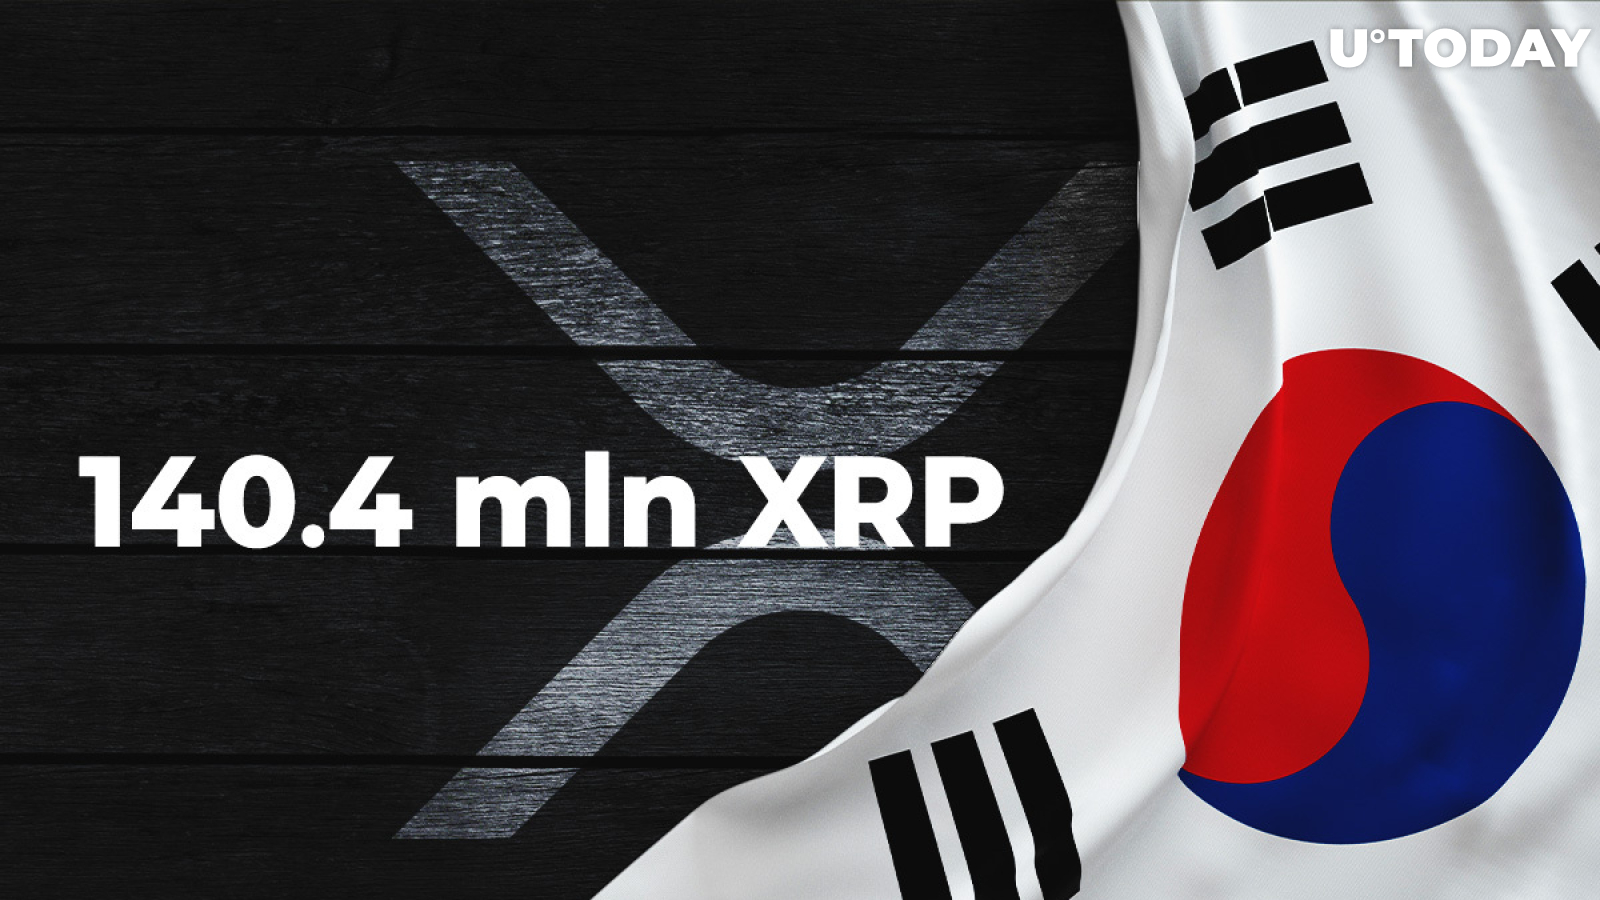 140.4 Mln XRP Moved in South Korea as XRP Holds at $0.16